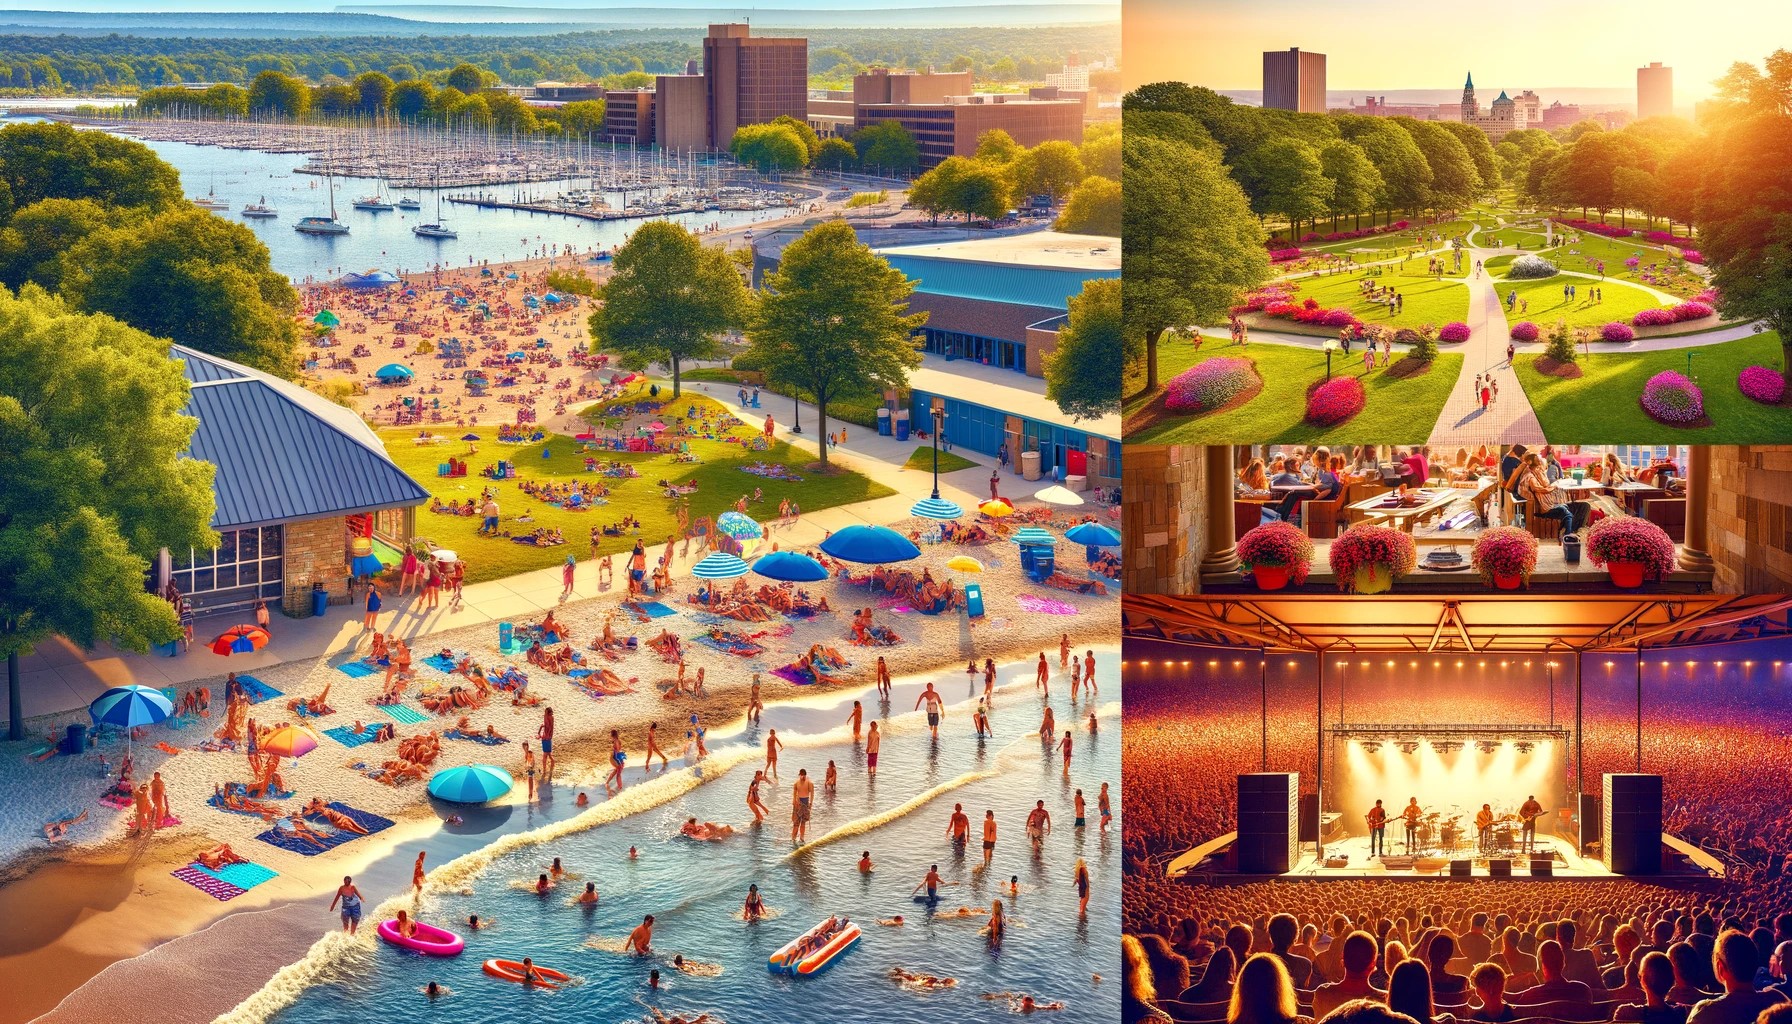 Summer in Rochester: Beaches, Parks, and Outdoor Concerts